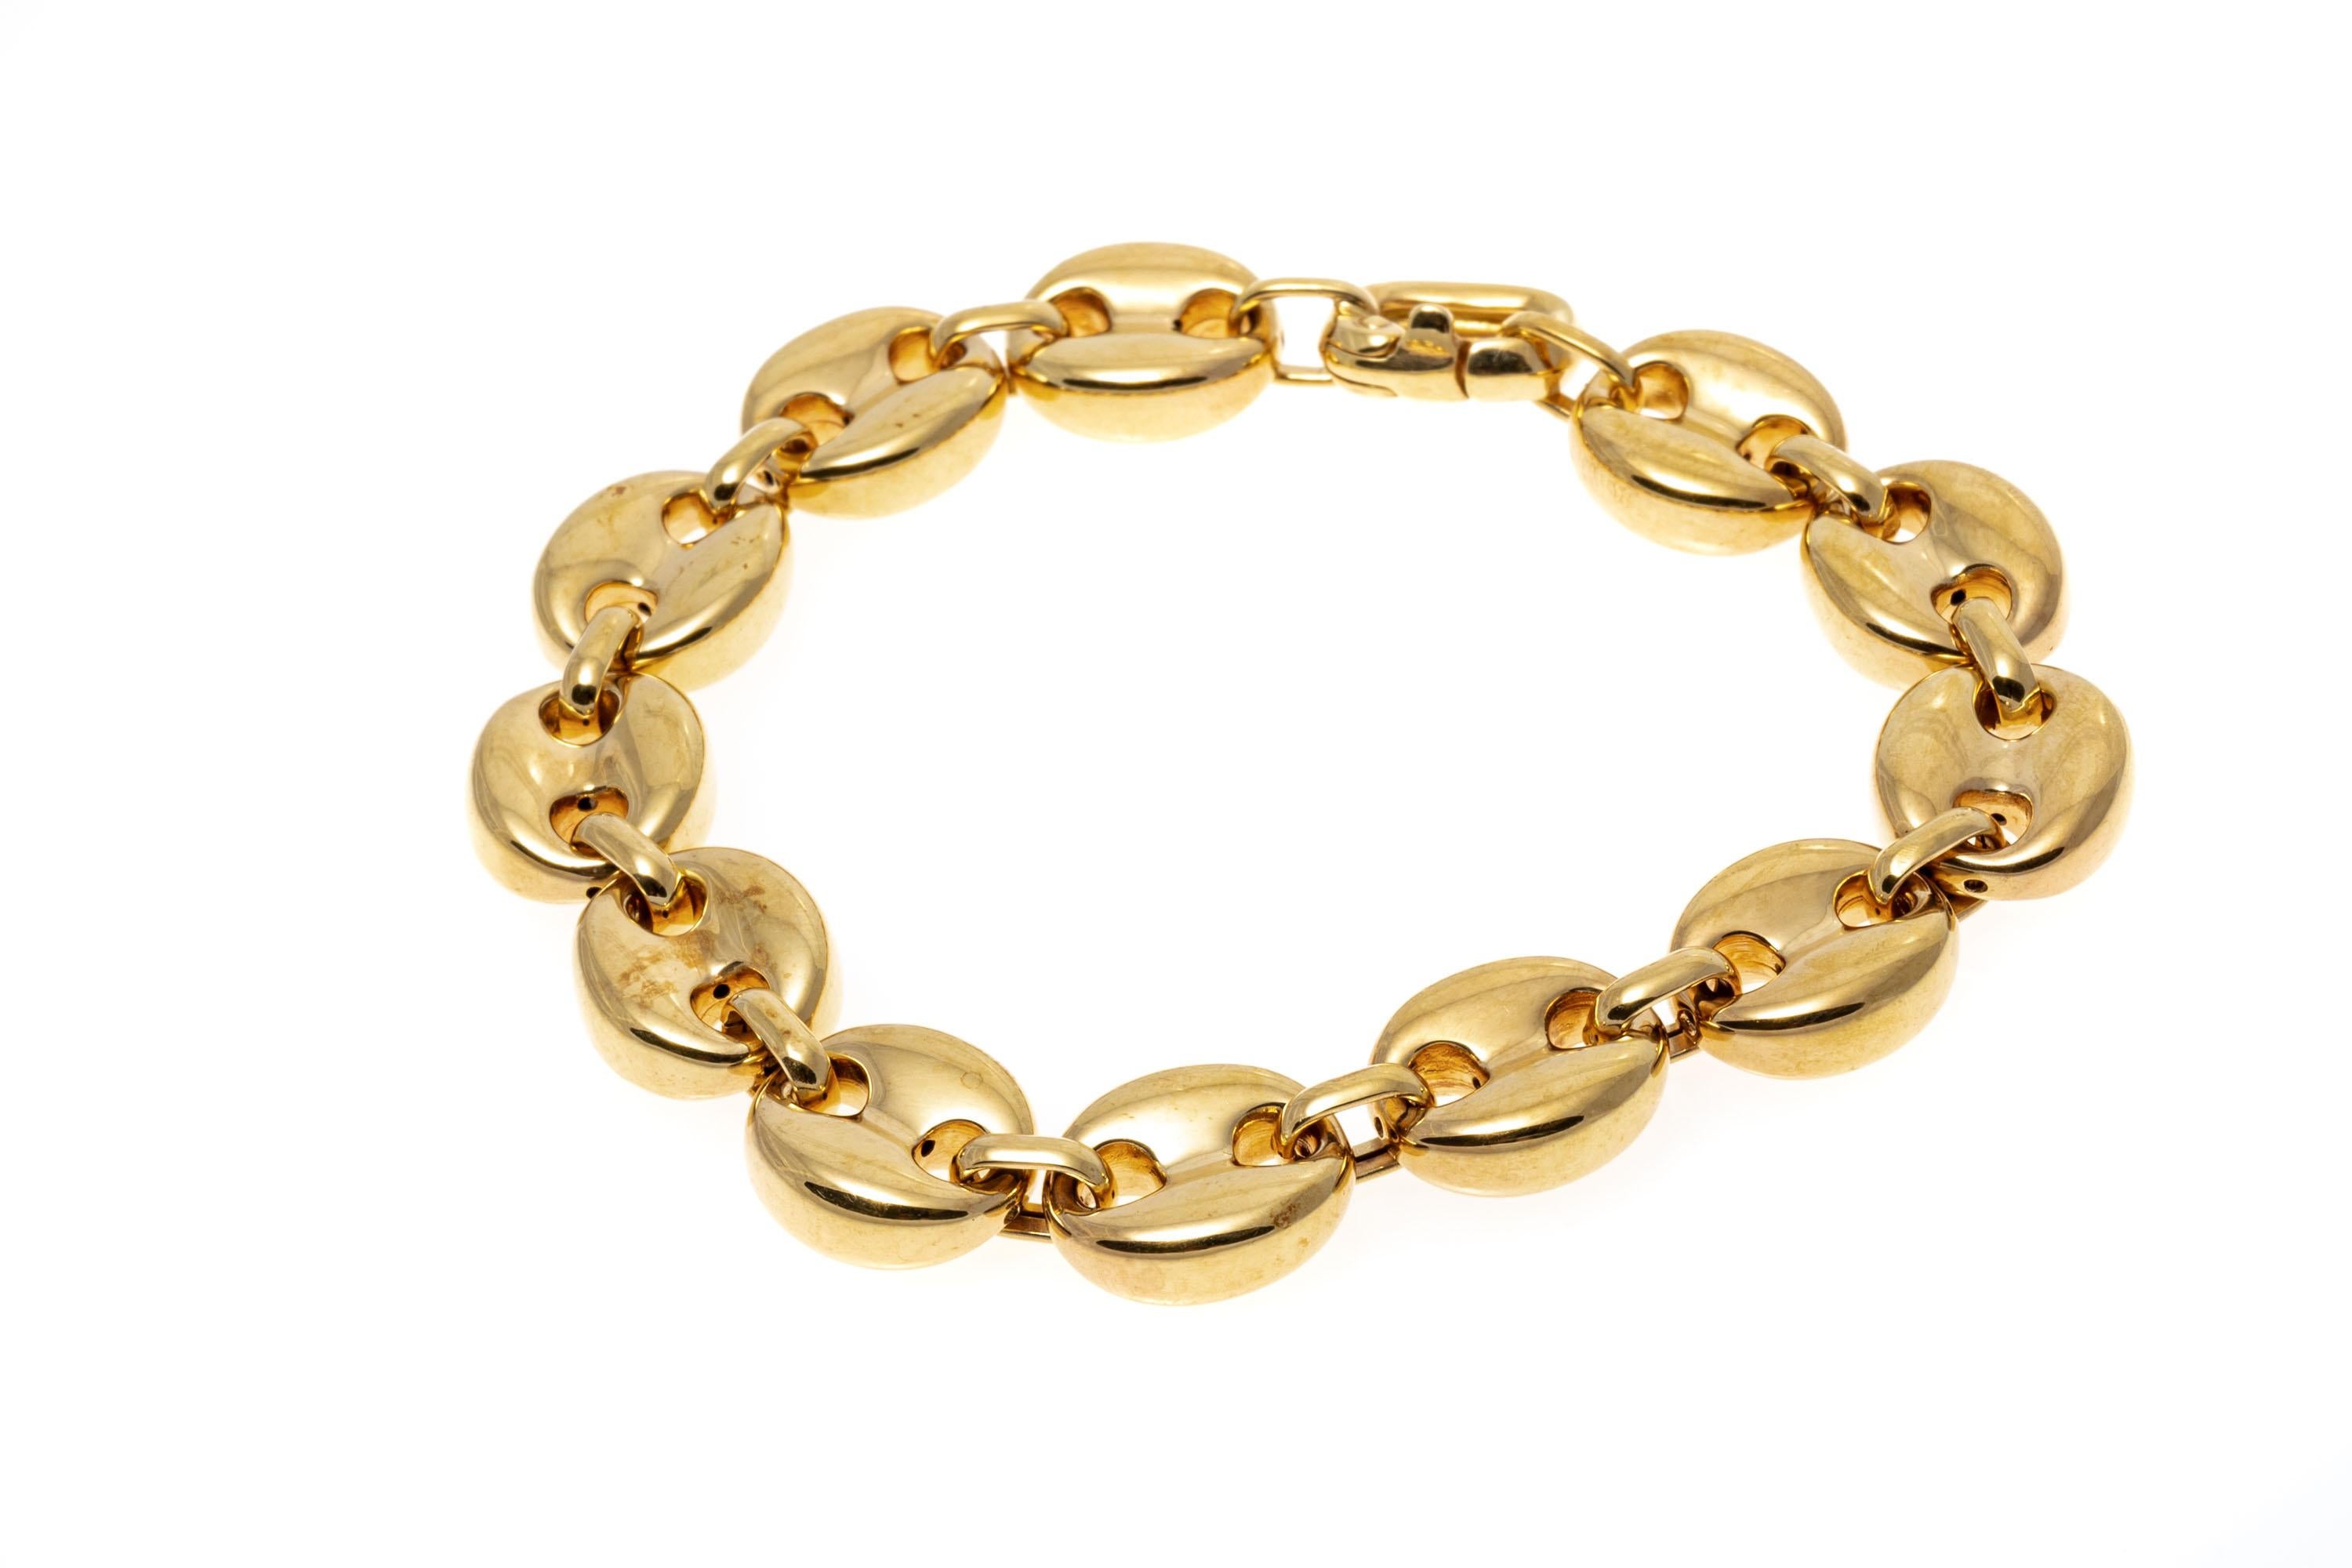 Handsome chain bracelet displaying puffed anchor style links crafted of 18K yellow gold, with a bright polished finish. Leaver style clasp.
Marks: 18K Italy
Dimensions: 8